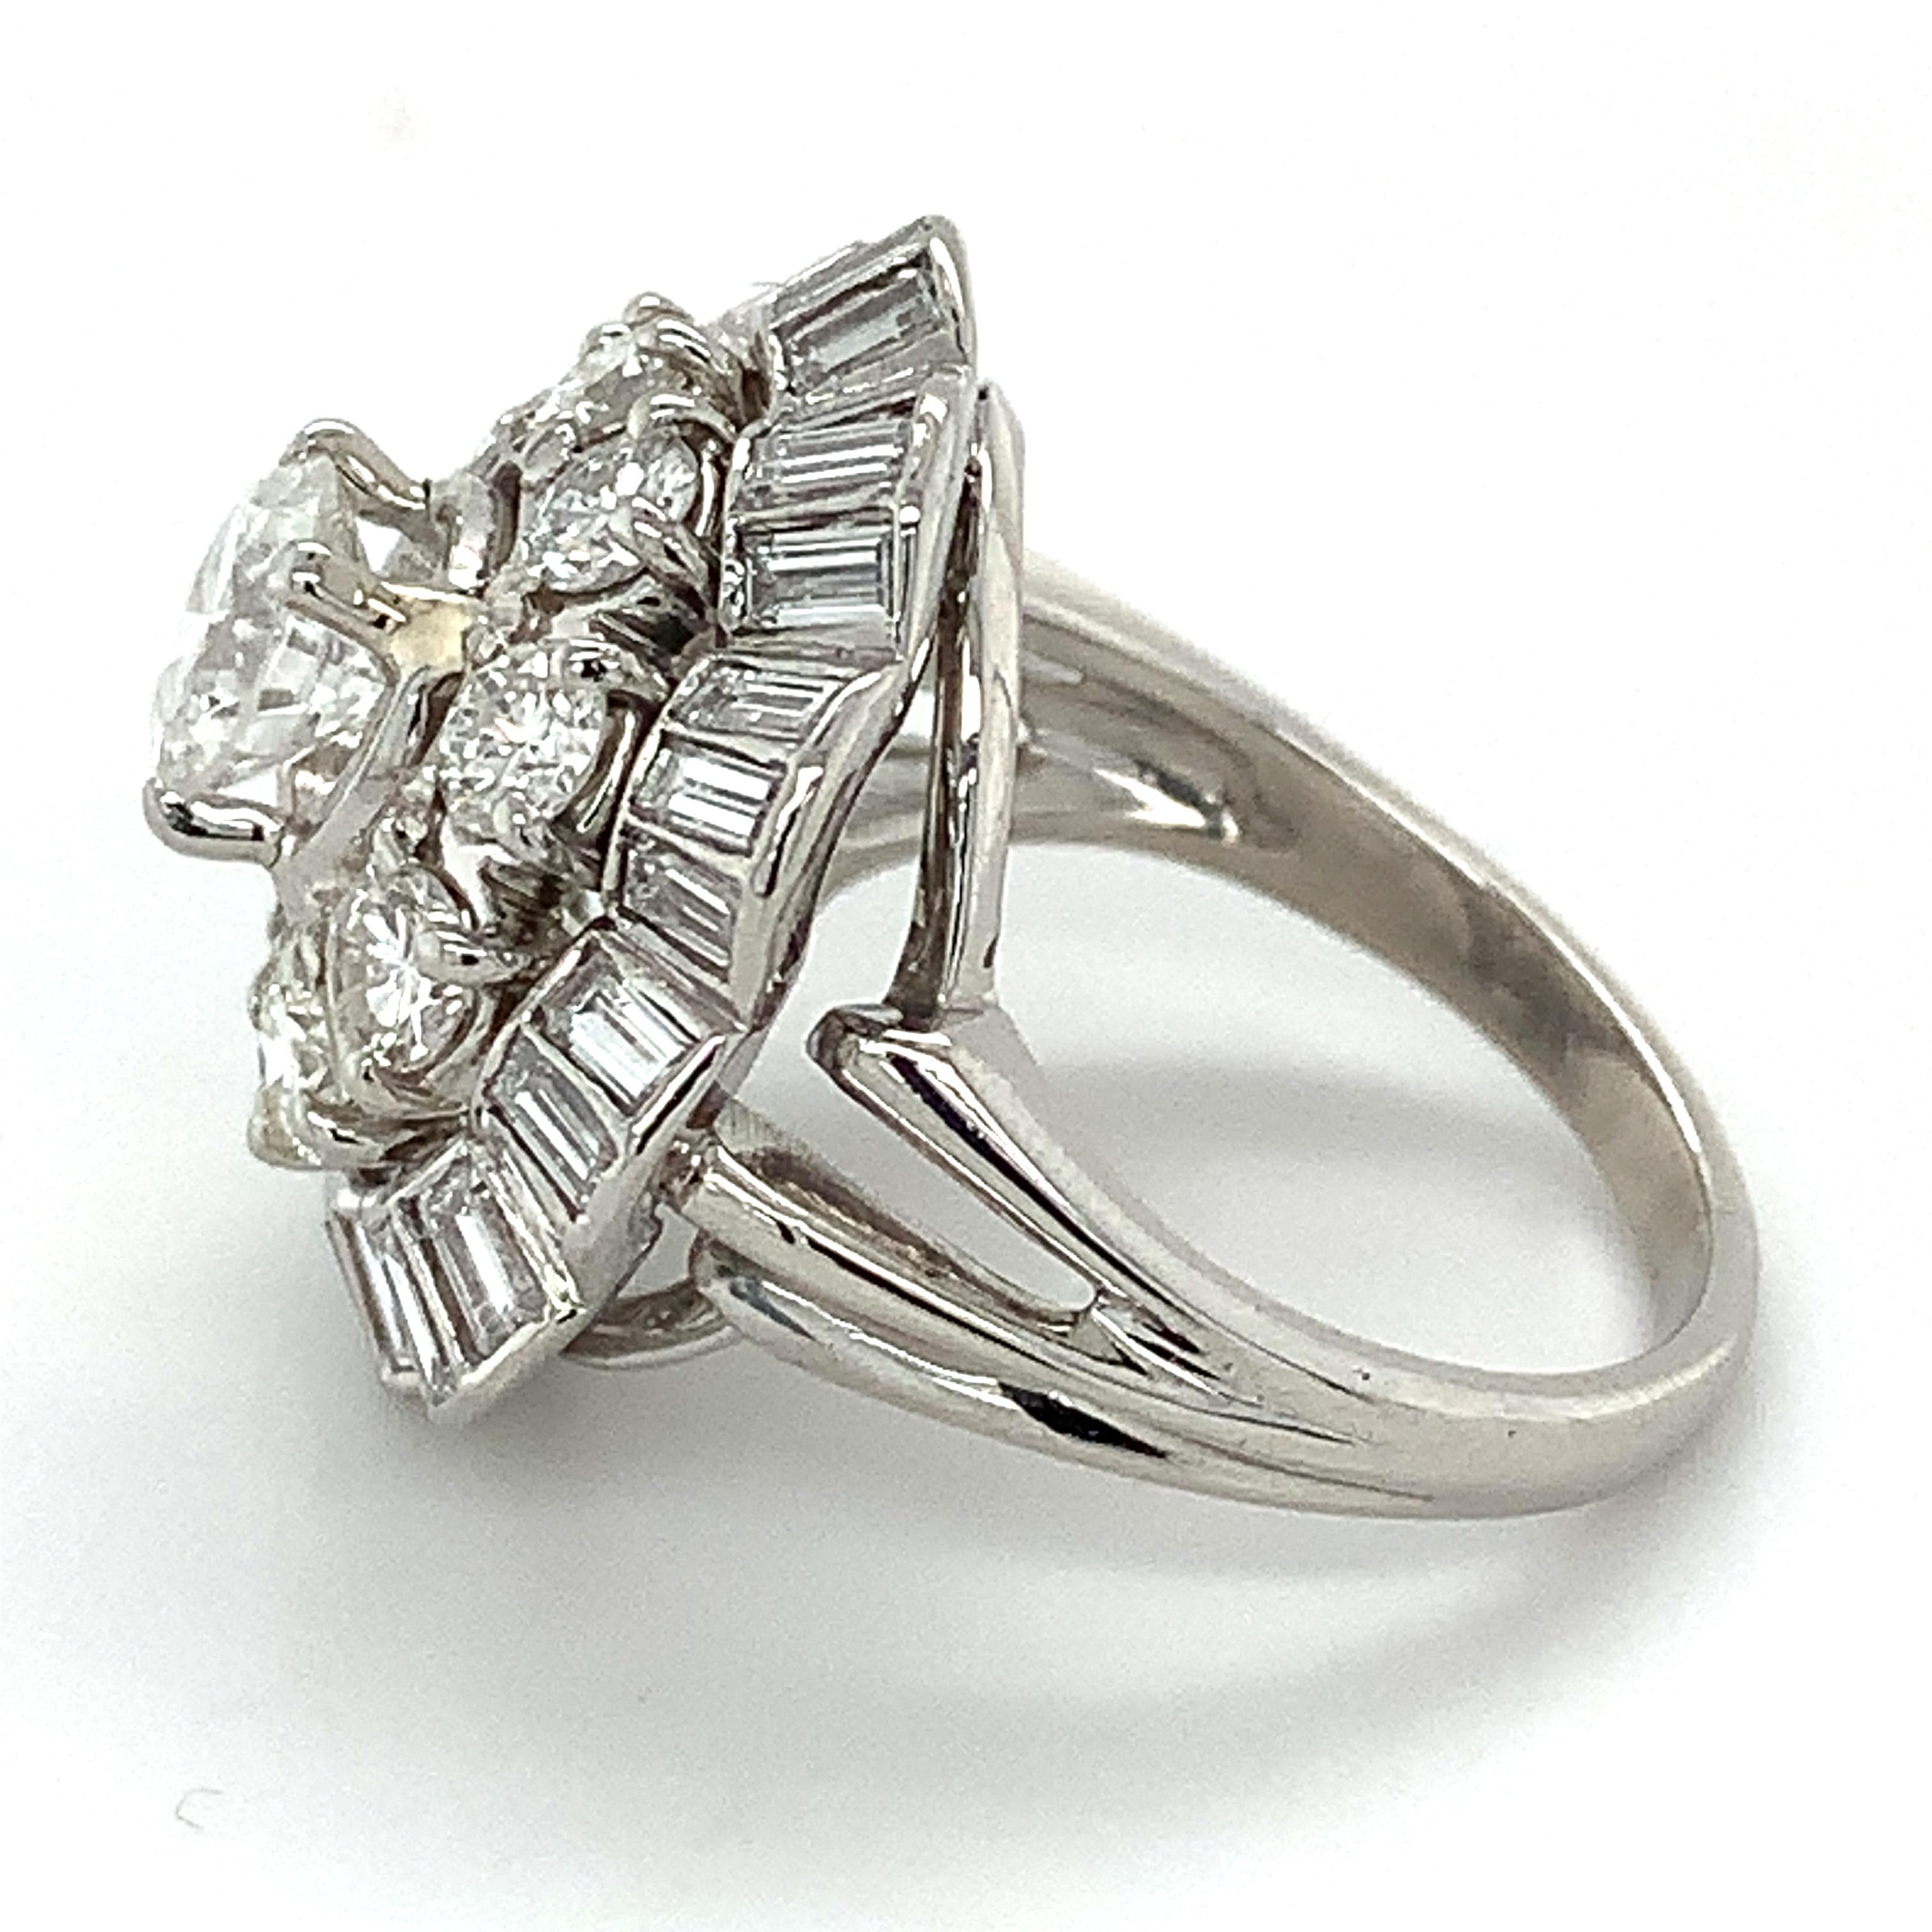 10 Irid 90 Plat Round Center And Ballerina Baguette And Round Diamond Halo Ring For Sale At